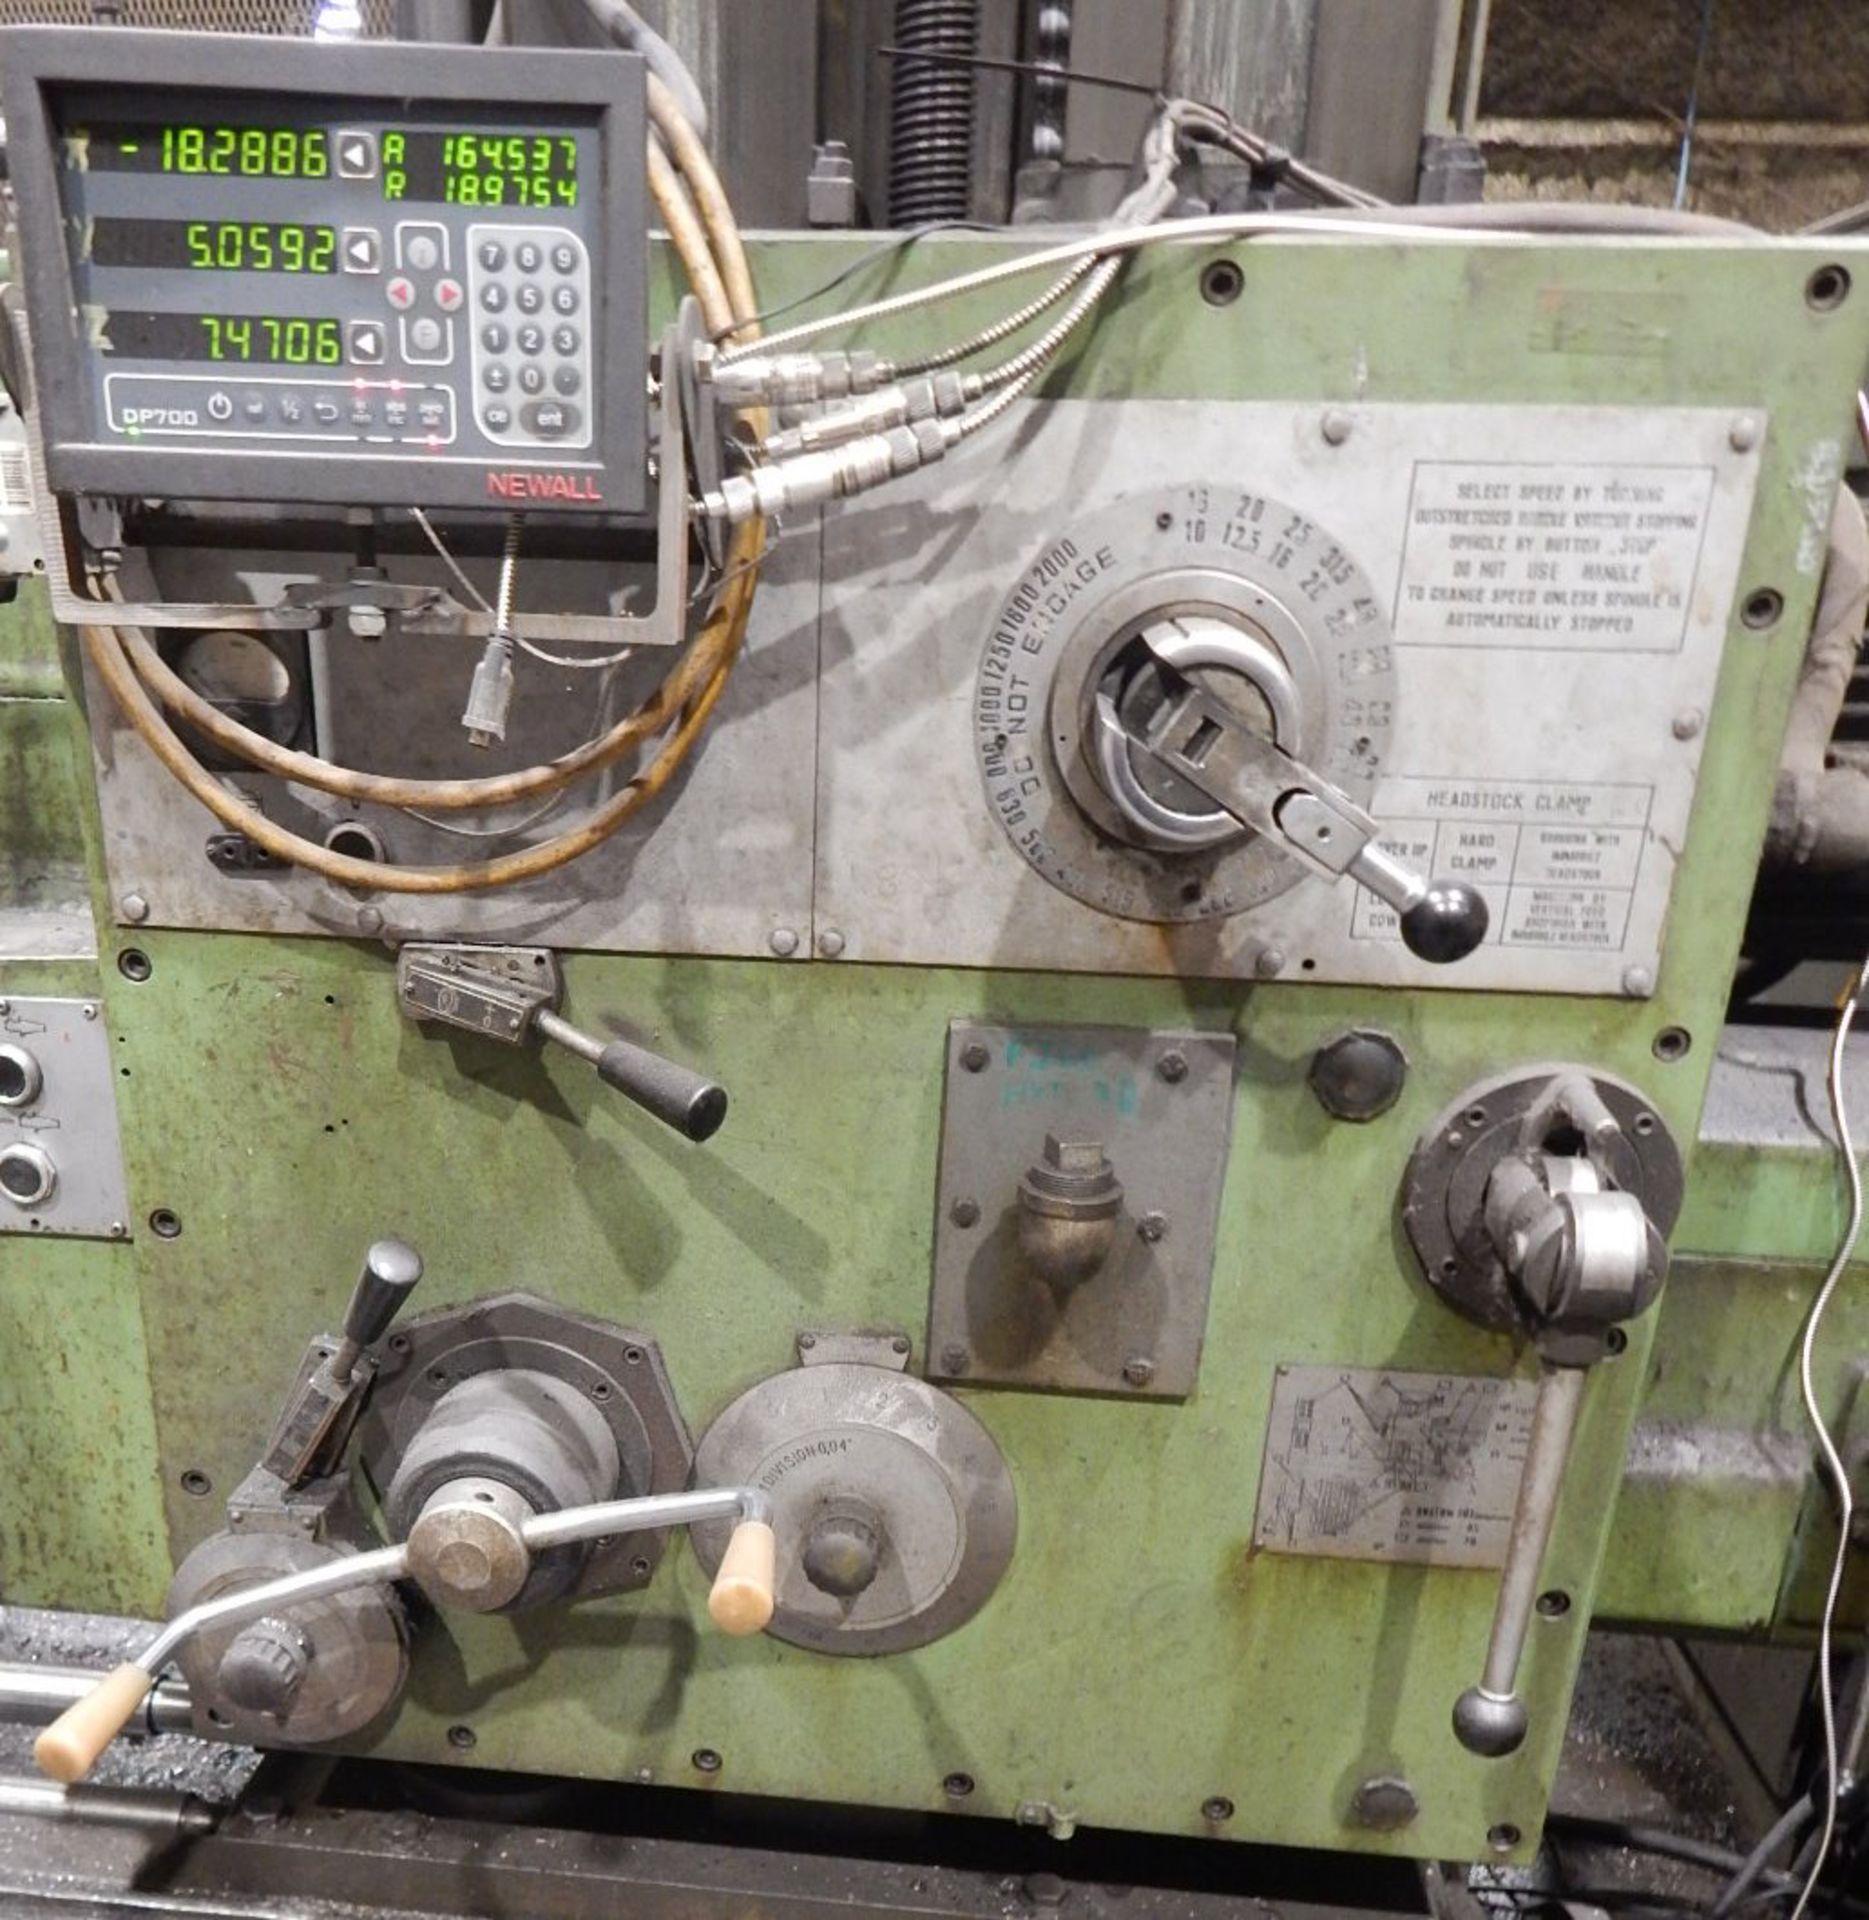 STANKO 2620B TABLE-TYPE BORING MILL WITH 3.5" SPINDLE, 44"X49" ROTARY T-SLOT TABLE, TRAVELS: - Image 3 of 8